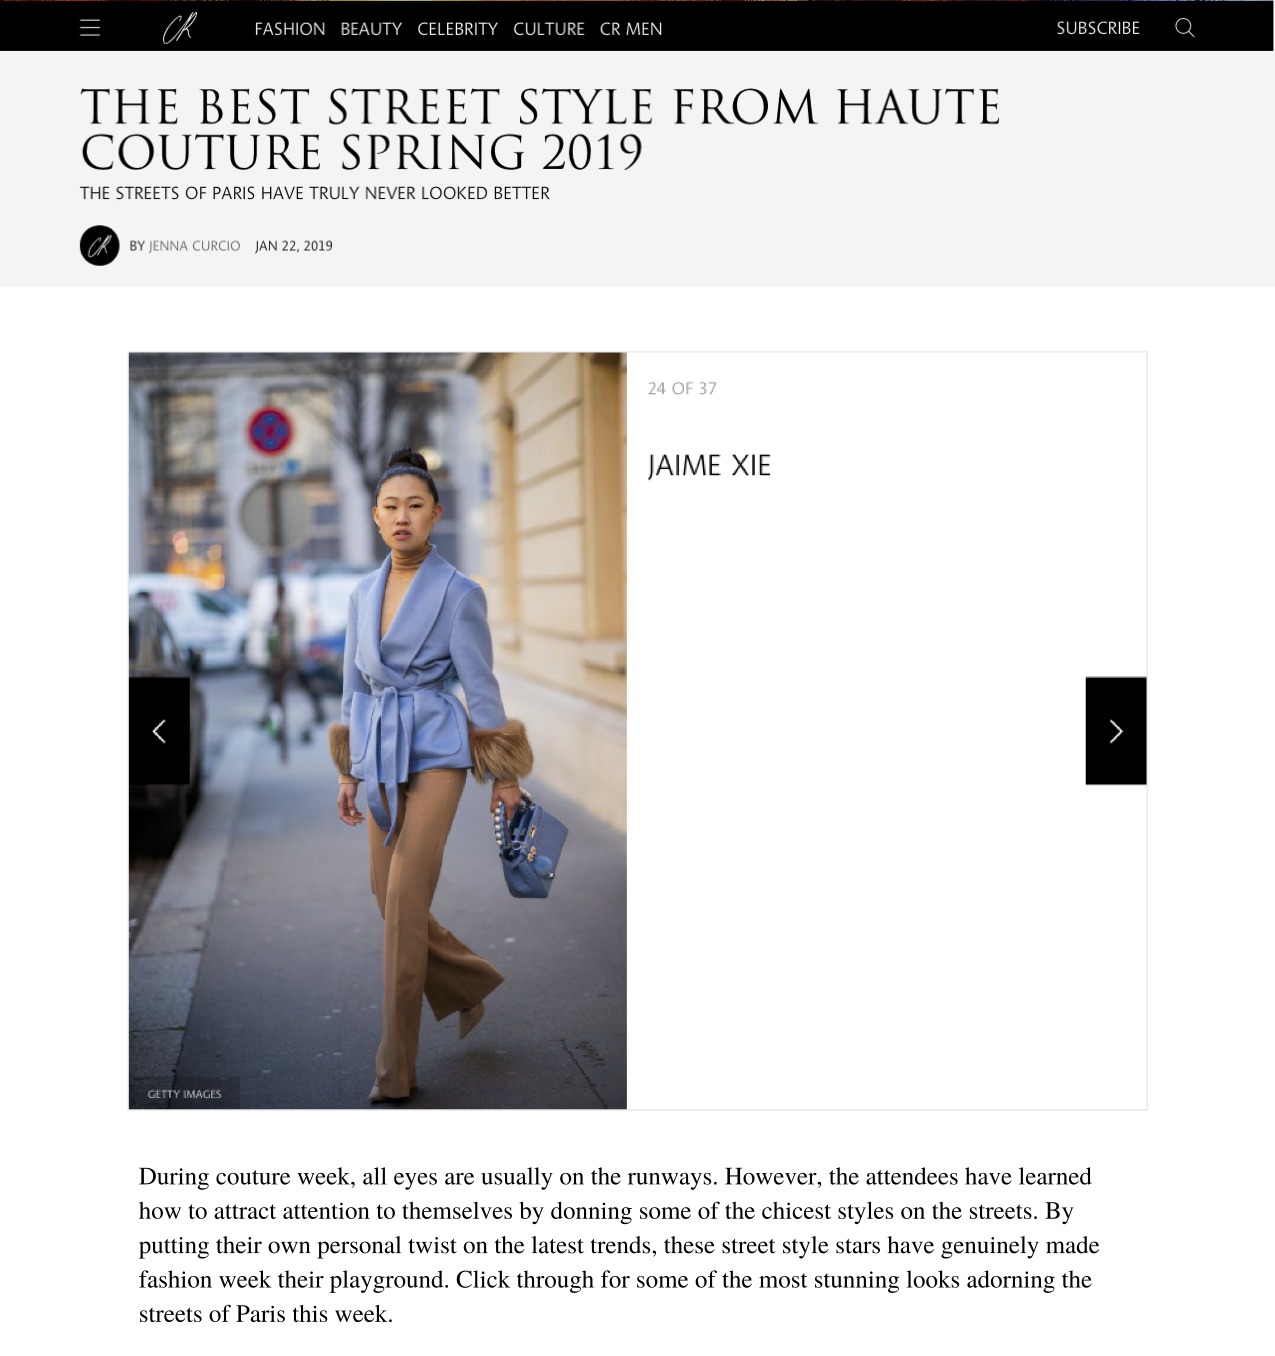 CR Fashion Book: The Best Street Style from Haute Couture Spring 2019